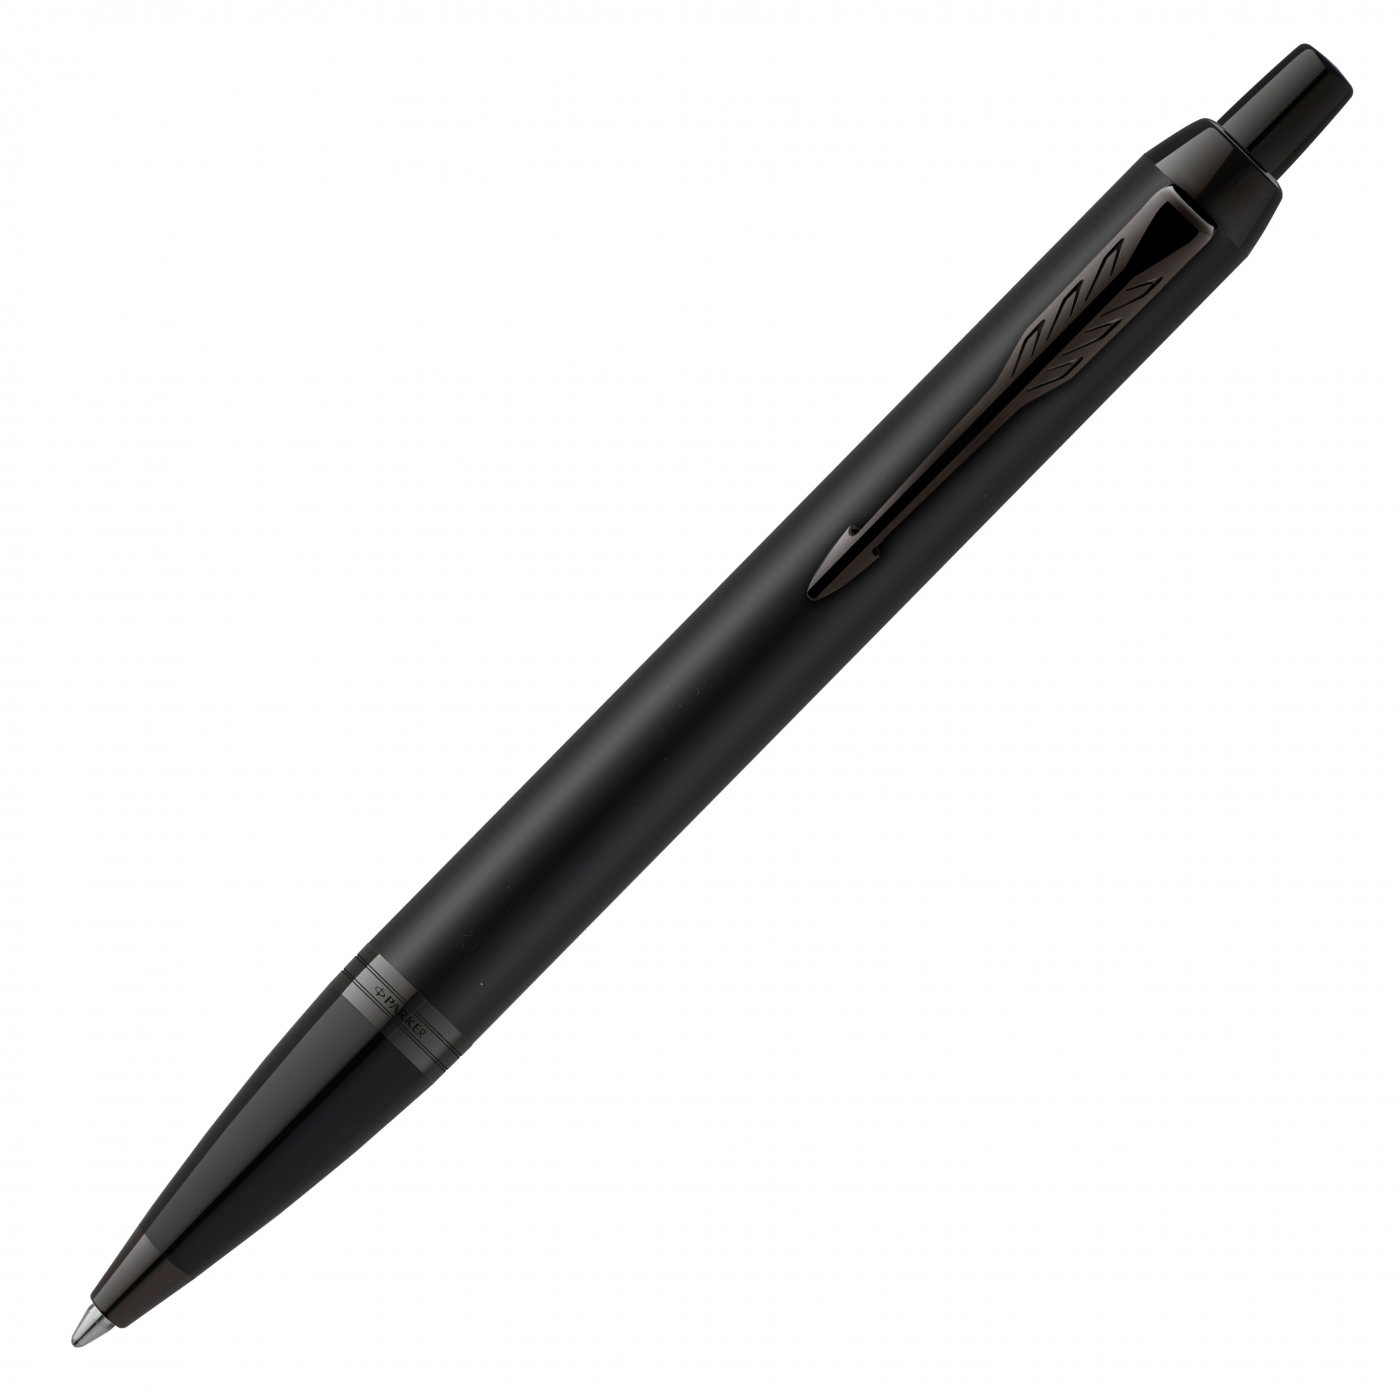 IM Achromatic Black Ballpoint in the group Pens / Writing / Ballpoints at Pen Store (111897)